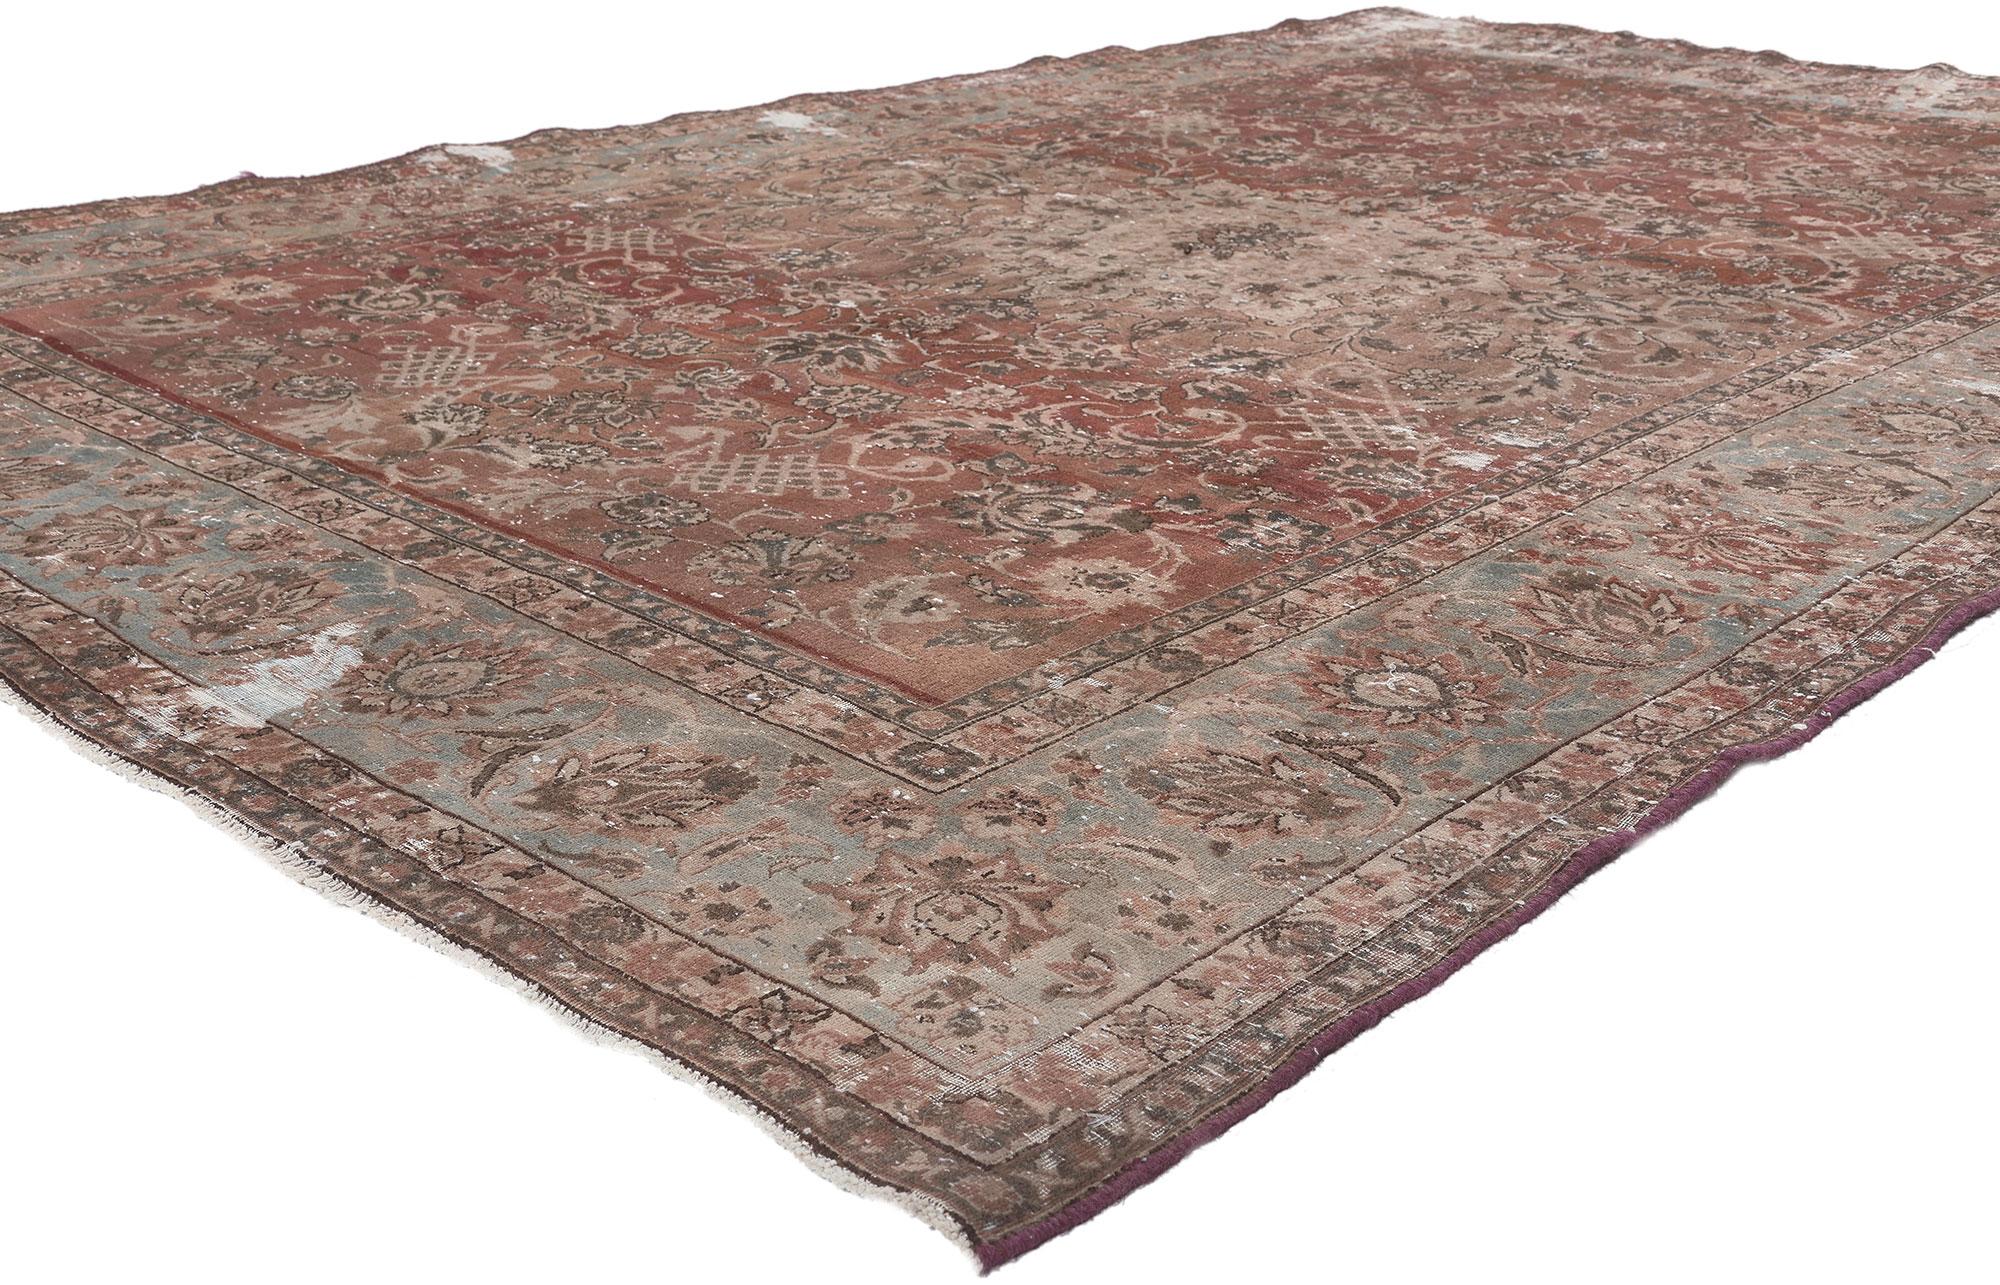 78599 Distressed Antique Persian Tabriz Rug, 06'05 x 09'08.
Rustic elegance meets unpretentious and simple in this distressed vintage Persian Tabriz rug. The botanical design and earthy colorway woven into this piece work together creating a rustic